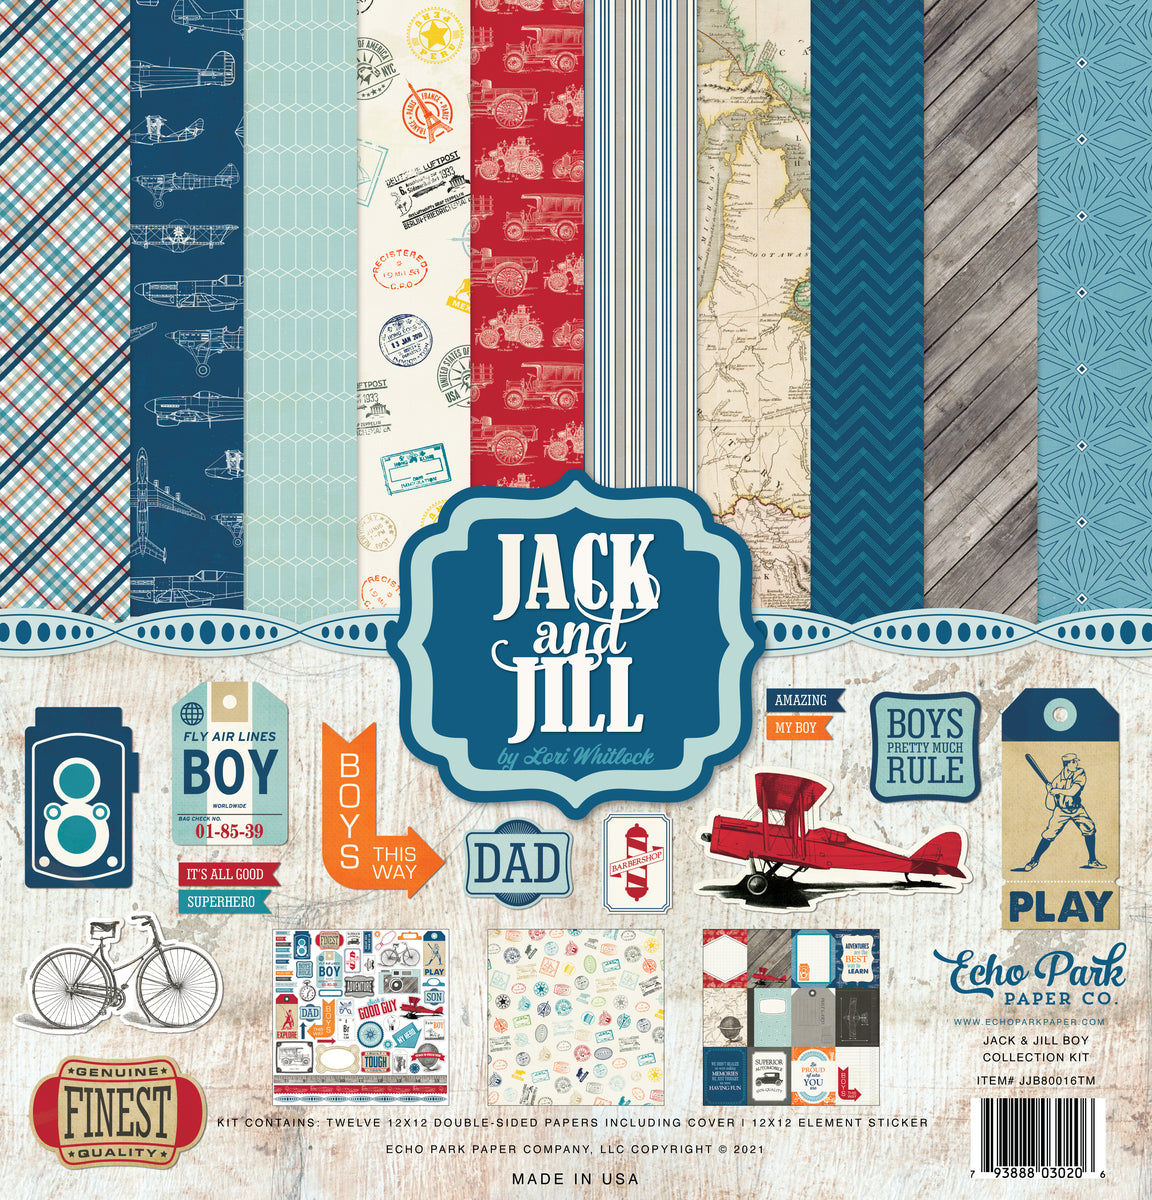 Jack and Jill - Boy - 12x12 collection kit with boy theme and colors by Echo Park Paper Co.